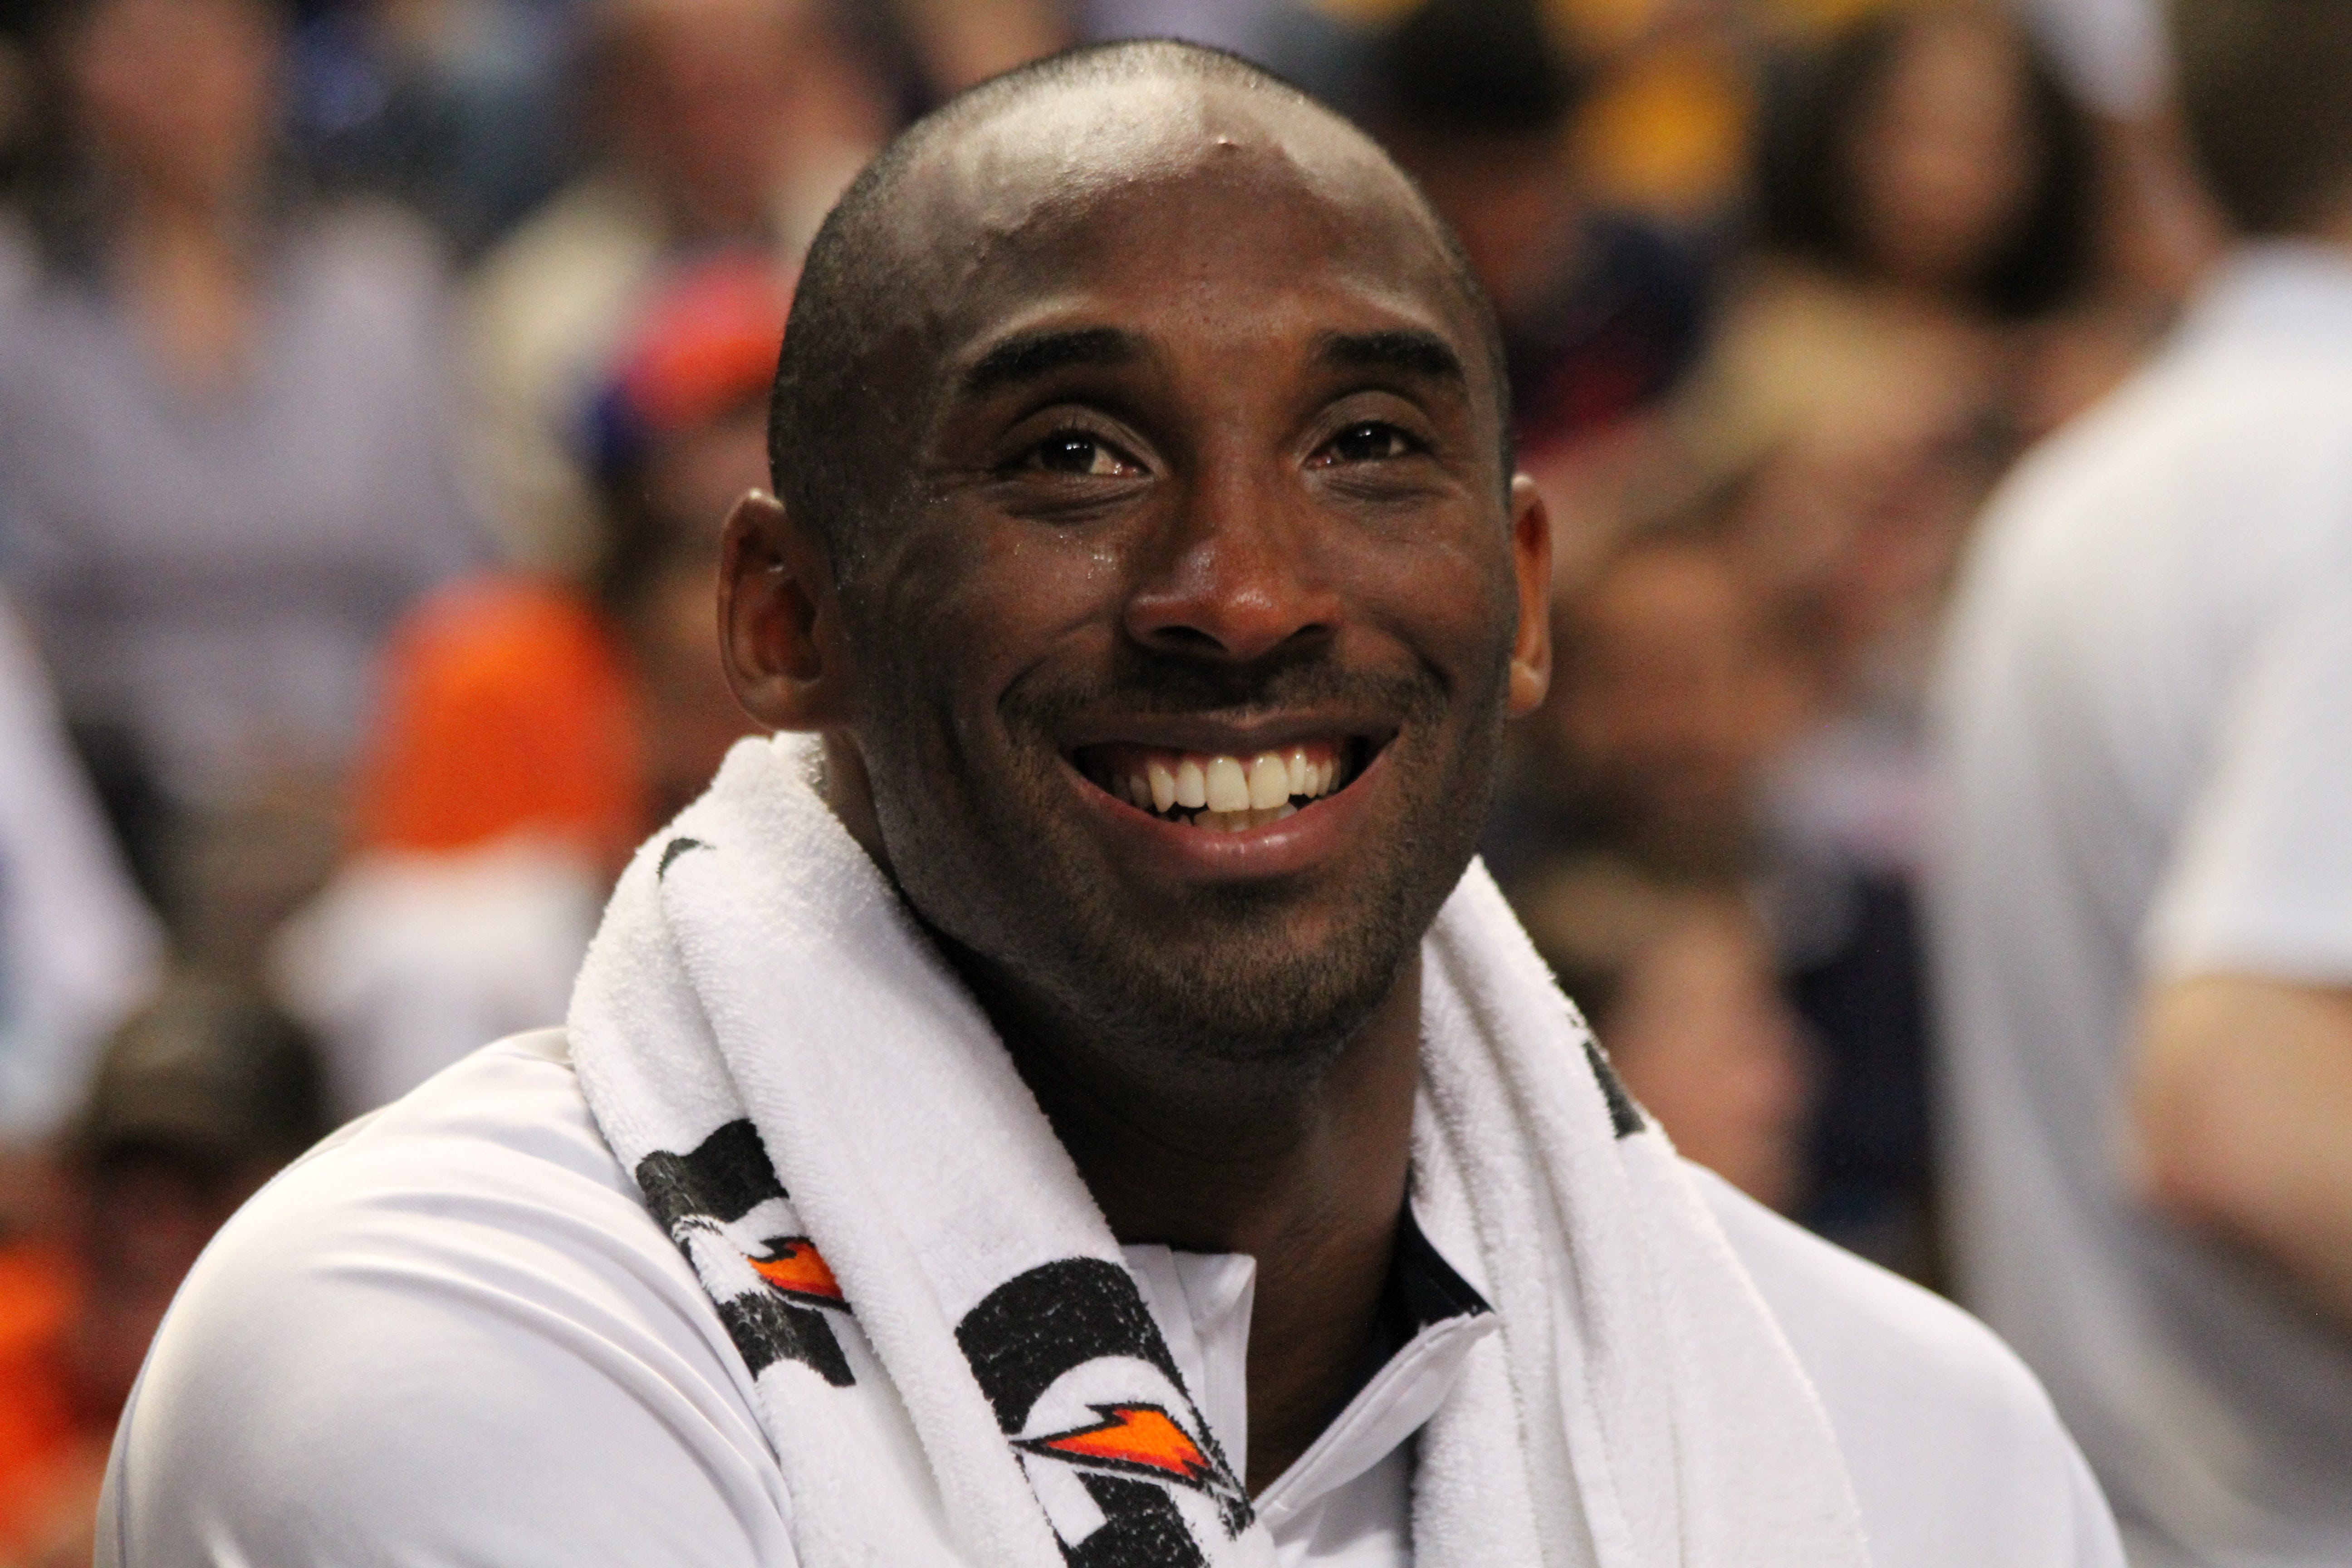 Kobe Bryant's life was cut short just as it blossomed into